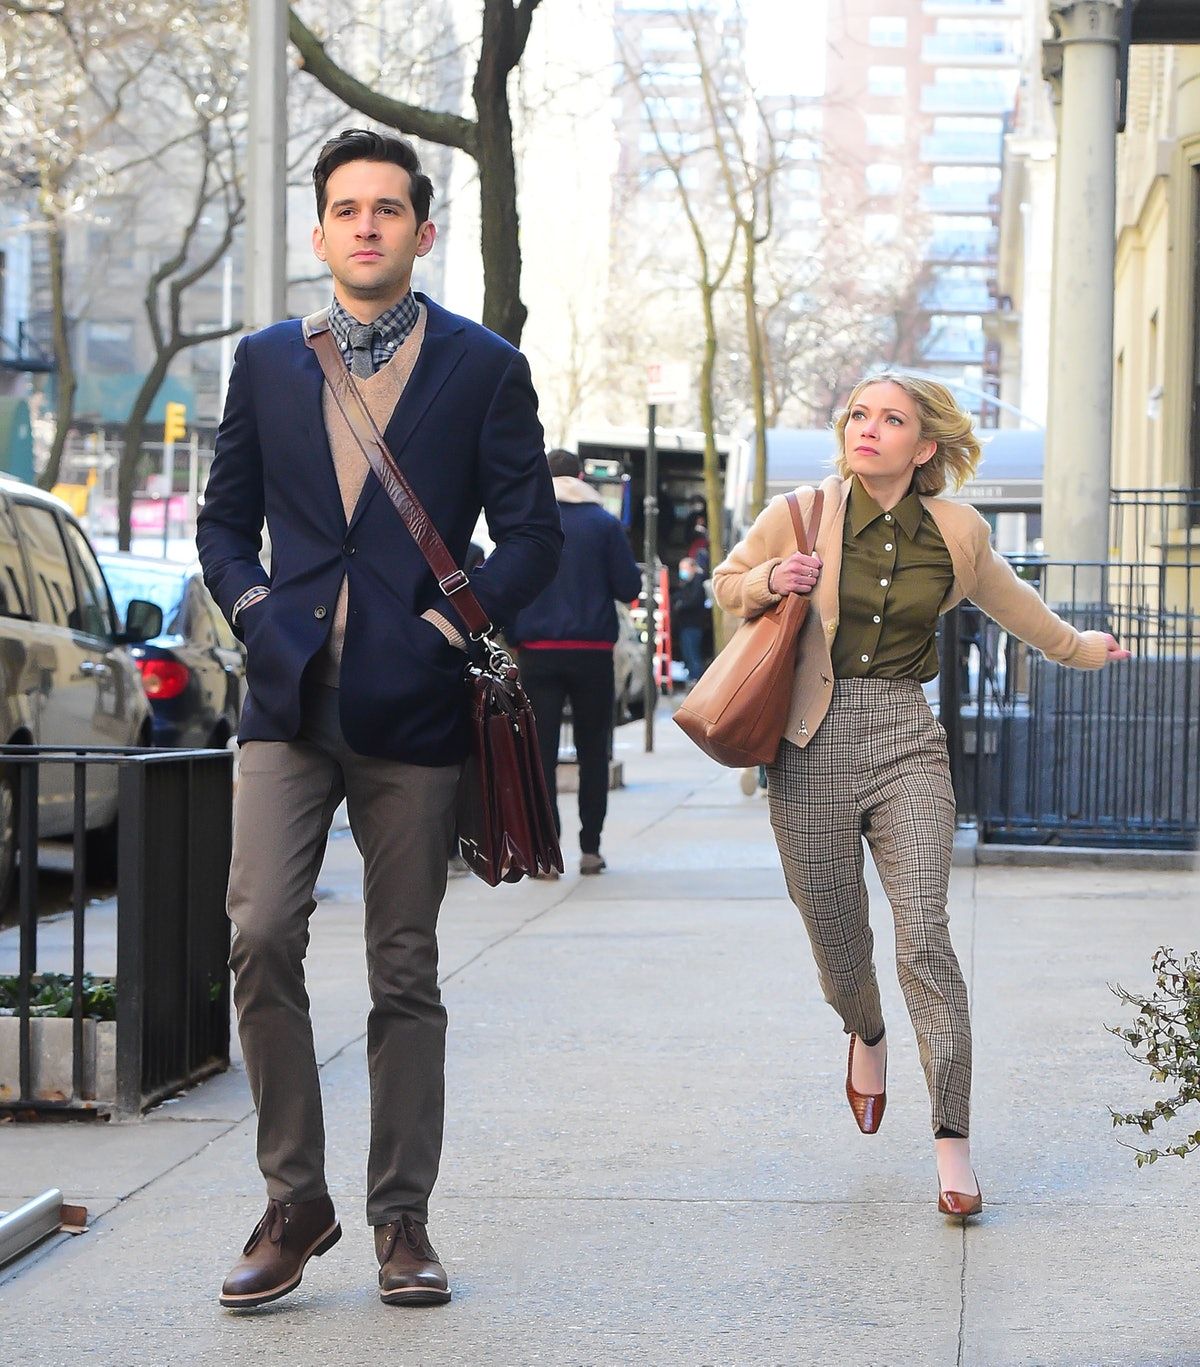 All The Best Looks From the 'Gossip Girl' Reboot We've Seen So Far